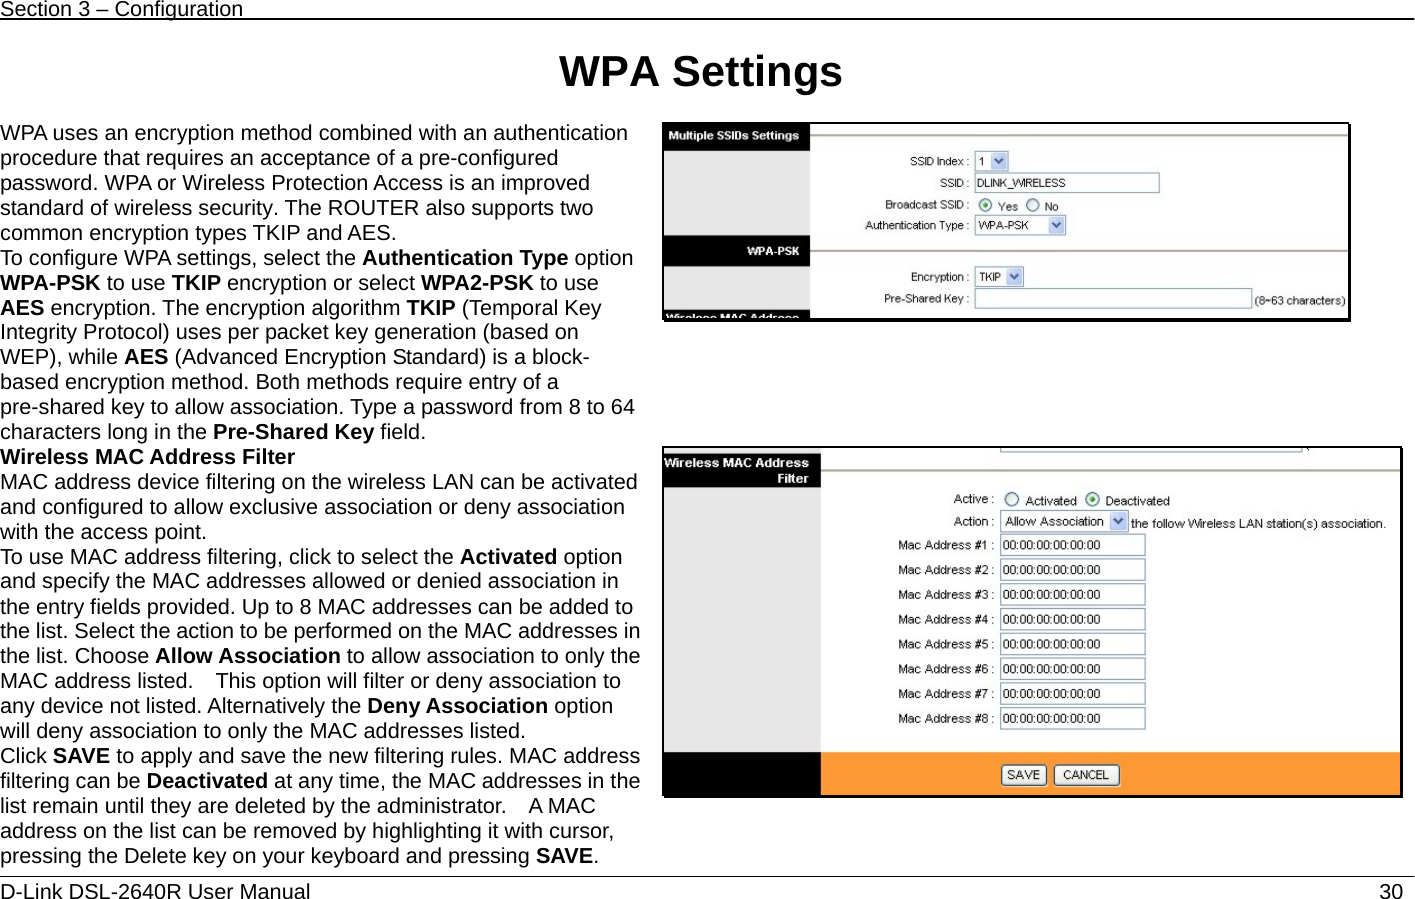 Section 3 – Configuration   D-Link DSL-2640R User Manual                           30WPA Settings  WPA uses an encryption method combined with an authentication procedure that requires an acceptance of a pre-configured password. WPA or Wireless Protection Access is an improved standard of wireless security. The ROUTER also supports two common encryption types TKIP and AES. To configure WPA settings, select the Authentication Type option WPA-PSK to use TKIP encryption or select WPA2-PSK to use AES encryption. The encryption algorithm TKIP (Temporal Key Integrity Protocol) uses per packet key generation (based on WEP), while AES (Advanced Encryption Standard) is a block- based encryption method. Both methods require entry of a pre-shared key to allow association. Type a password from 8 to 64 characters long in the Pre-Shared Key field.  Wireless MAC Address Filter MAC address device filtering on the wireless LAN can be activated and configured to allow exclusive association or deny association with the access point.     To use MAC address filtering, click to select the Activated option and specify the MAC addresses allowed or denied association in the entry fields provided. Up to 8 MAC addresses can be added to the list. Select the action to be performed on the MAC addresses in the list. Choose Allow Association to allow association to only the MAC address listed.    This option will filter or deny association to any device not listed. Alternatively the Deny Association option will deny association to only the MAC addresses listed. Click SAVE to apply and save the new filtering rules. MAC address filtering can be Deactivated at any time, the MAC addresses in the list remain until they are deleted by the administrator.    A MAC address on the list can be removed by highlighting it with cursor, pressing the Delete key on your keyboard and pressing SAVE. 